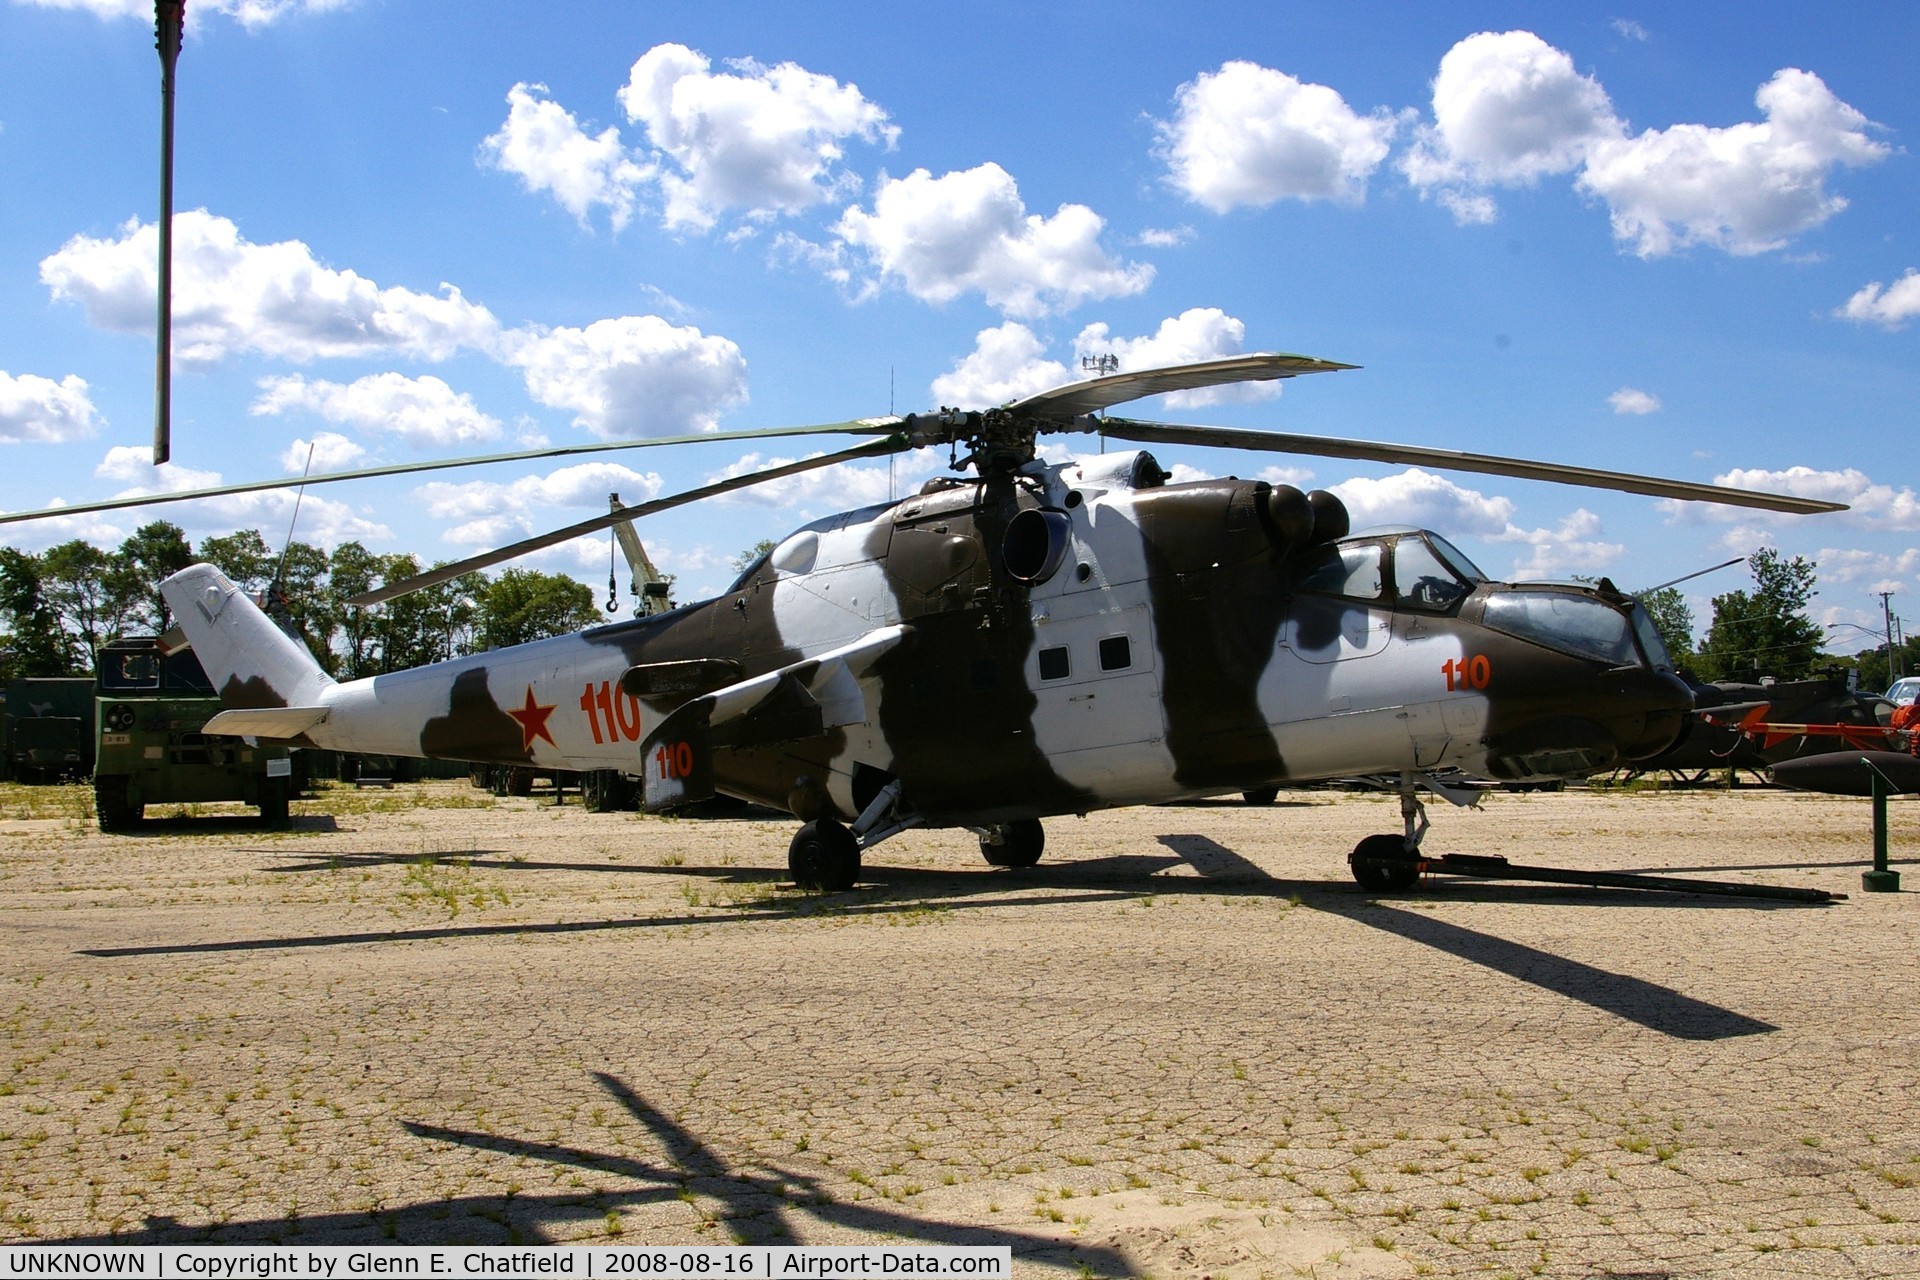 UNKNOWN, , Mi-24 at the Russell Military Museum, Russell, IL